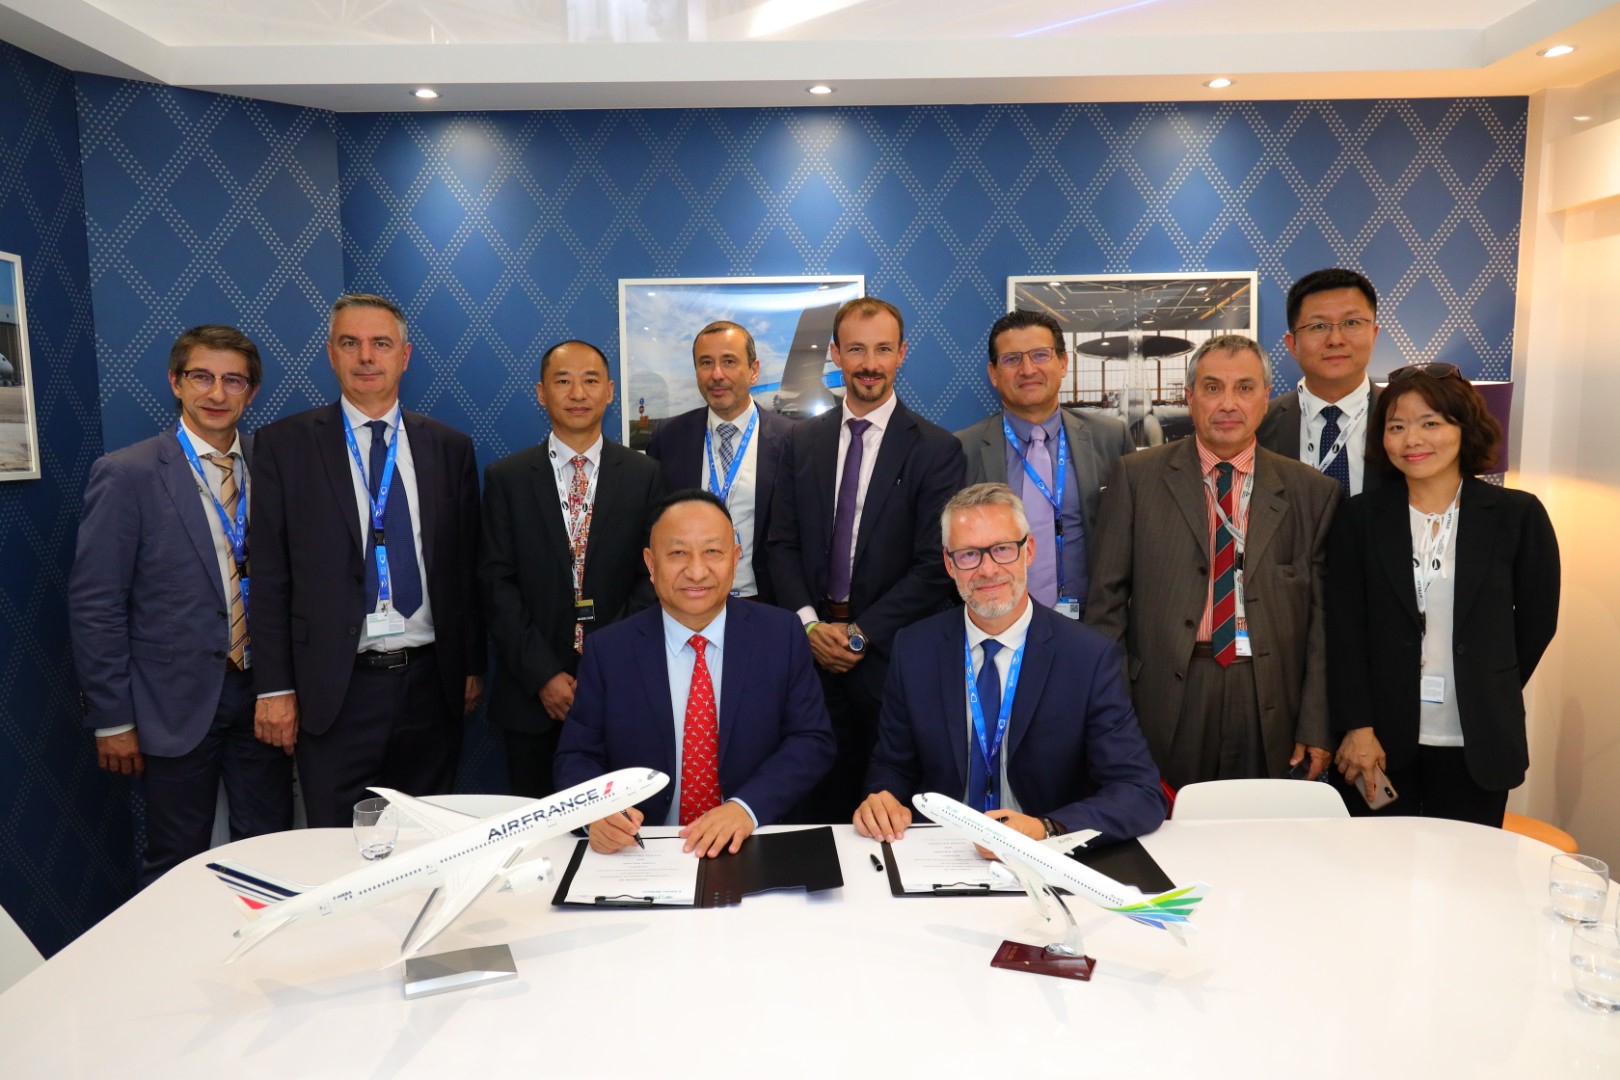 Cambodia-based Lanmei Airlines selects AFI KLM E&M support services